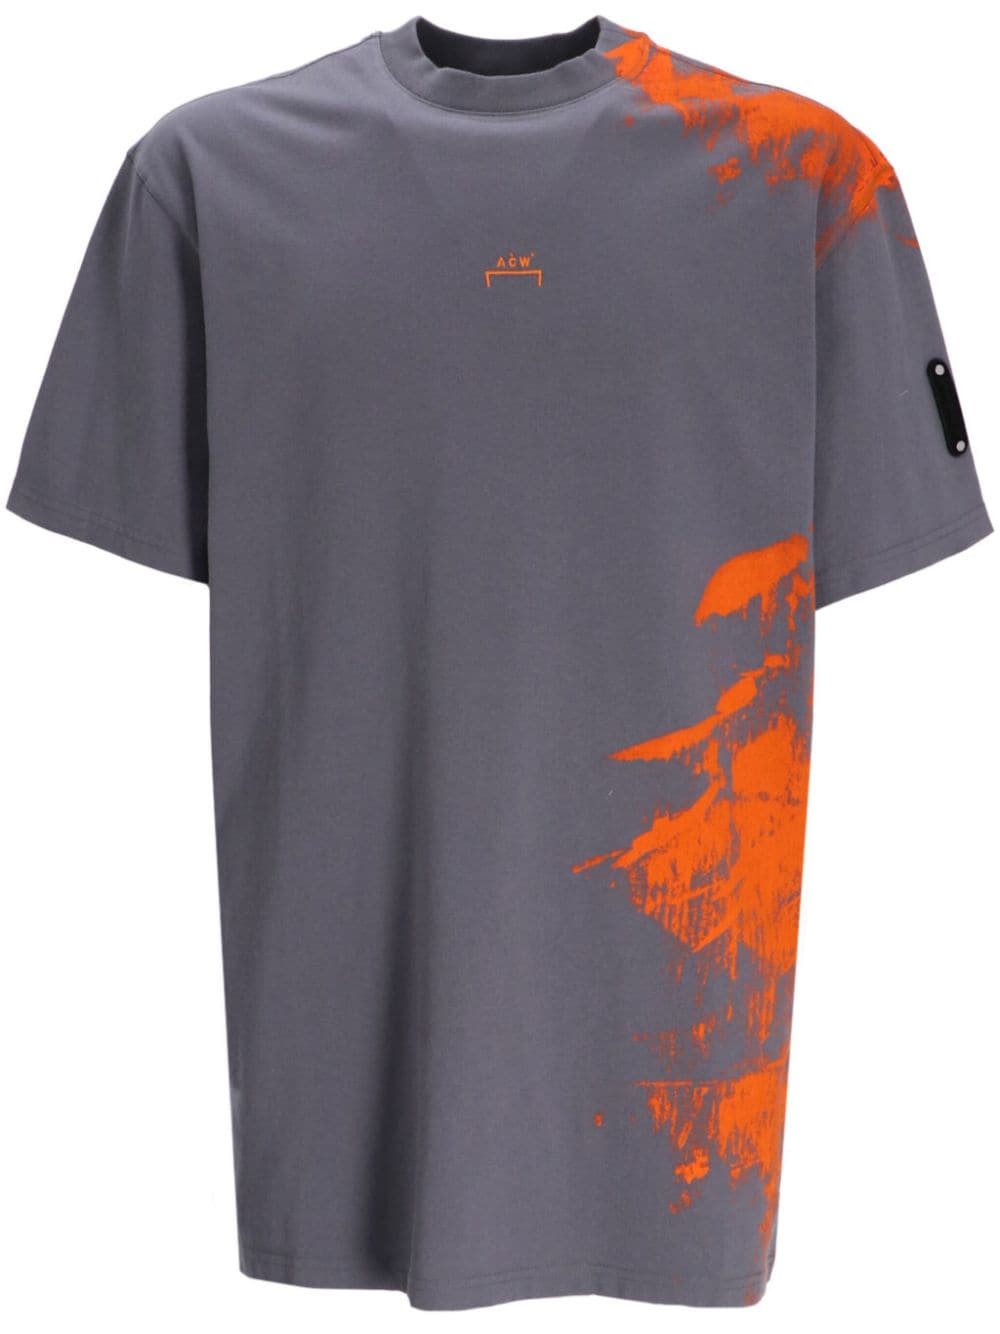 A-COLD-WALL* Brushstroke cotton T-shirt - Grey von A-COLD-WALL*